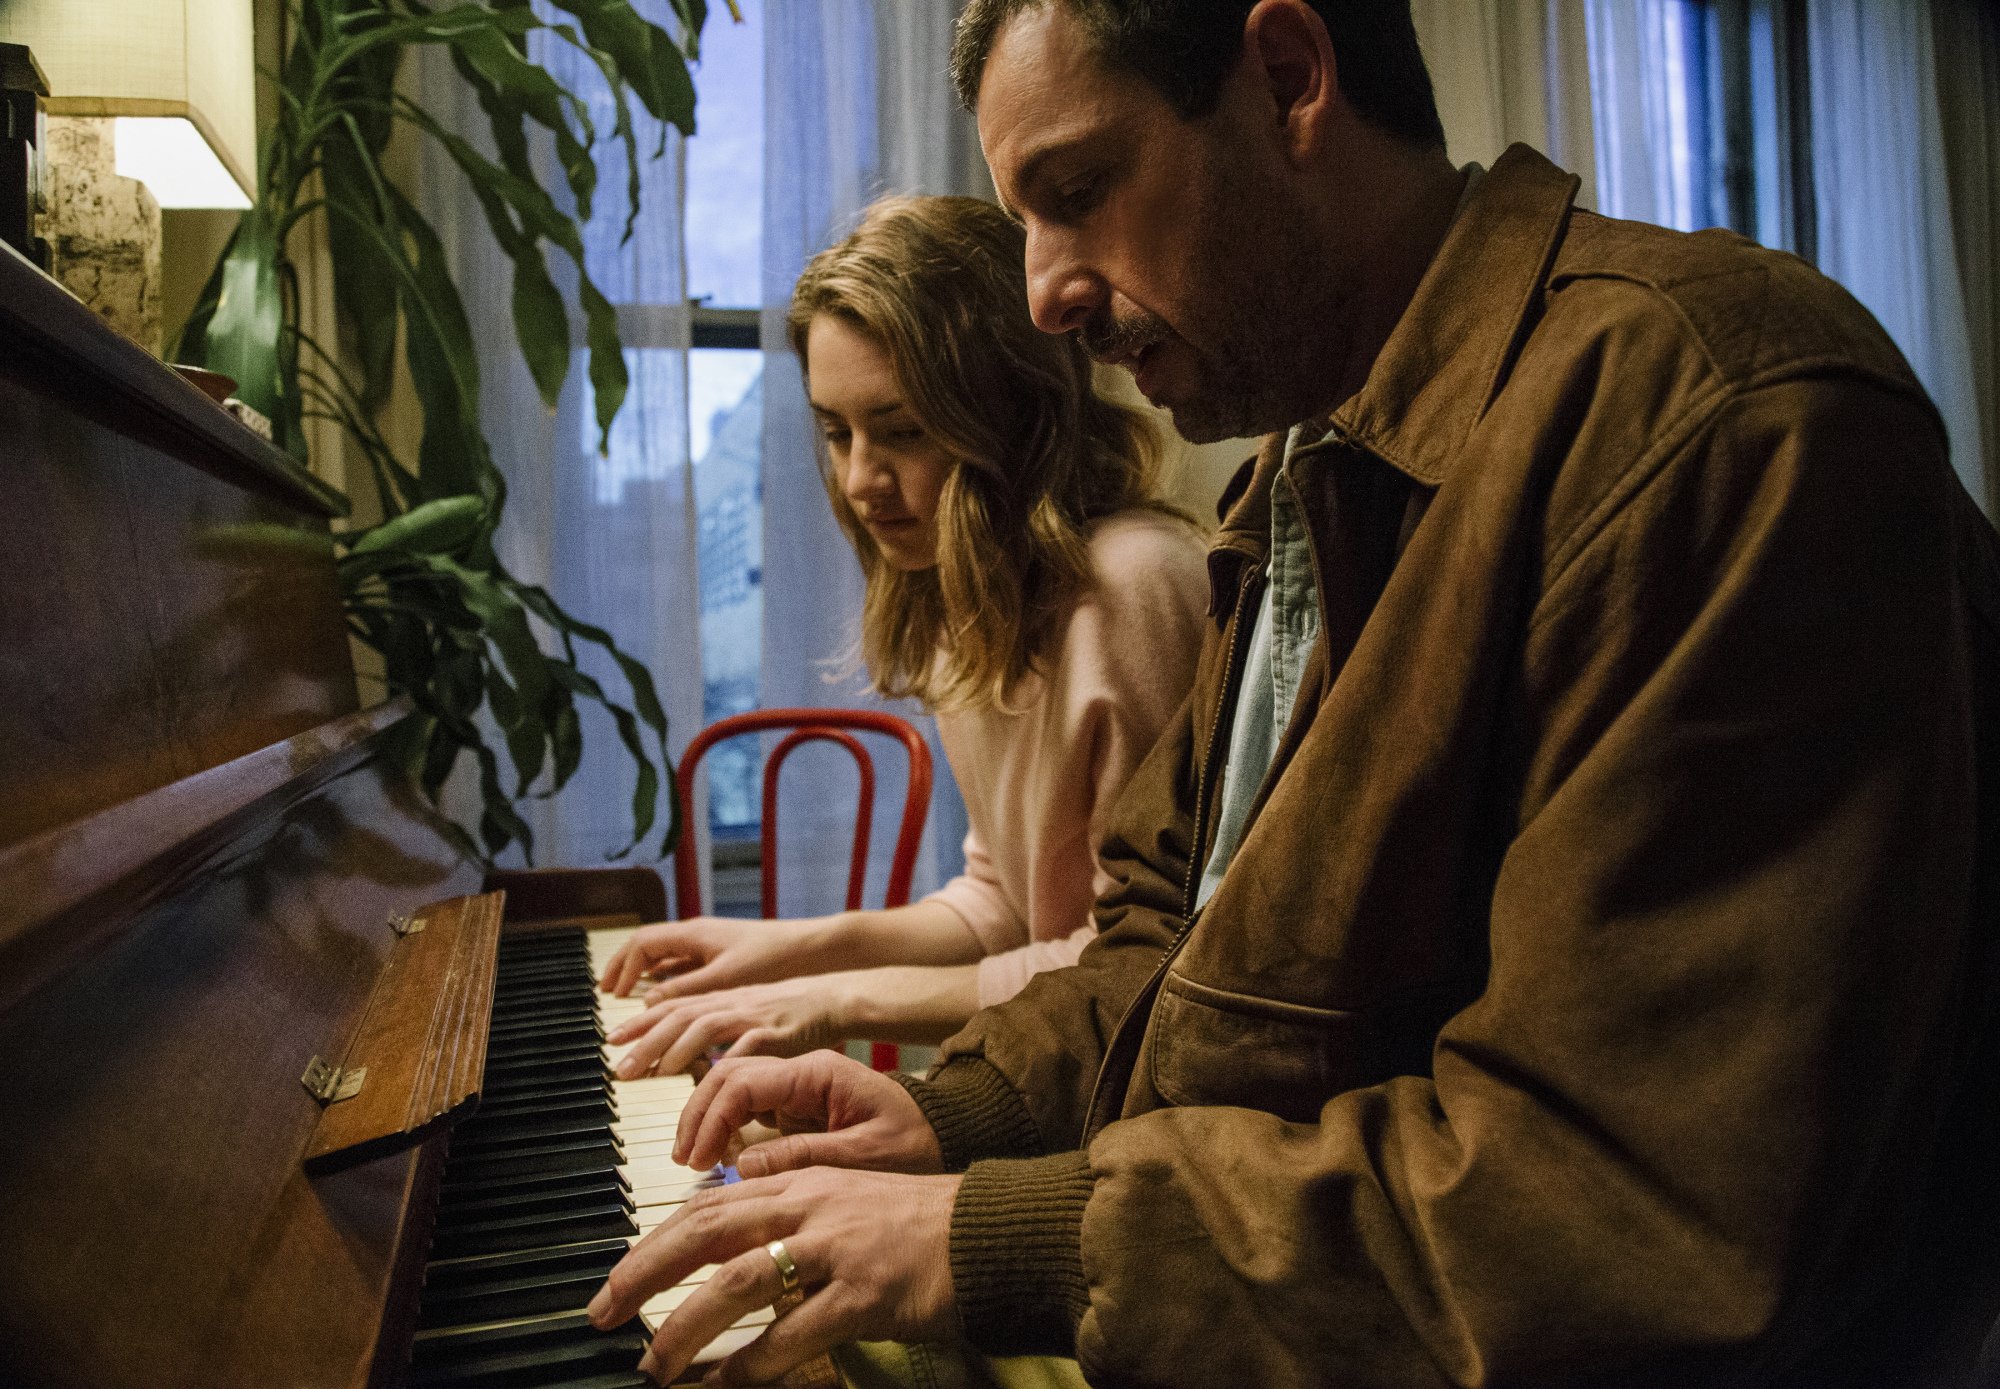 Grace Van Patten and Adam Sandler sit next to each other playing the piano in "The Meyerowitz Stories."